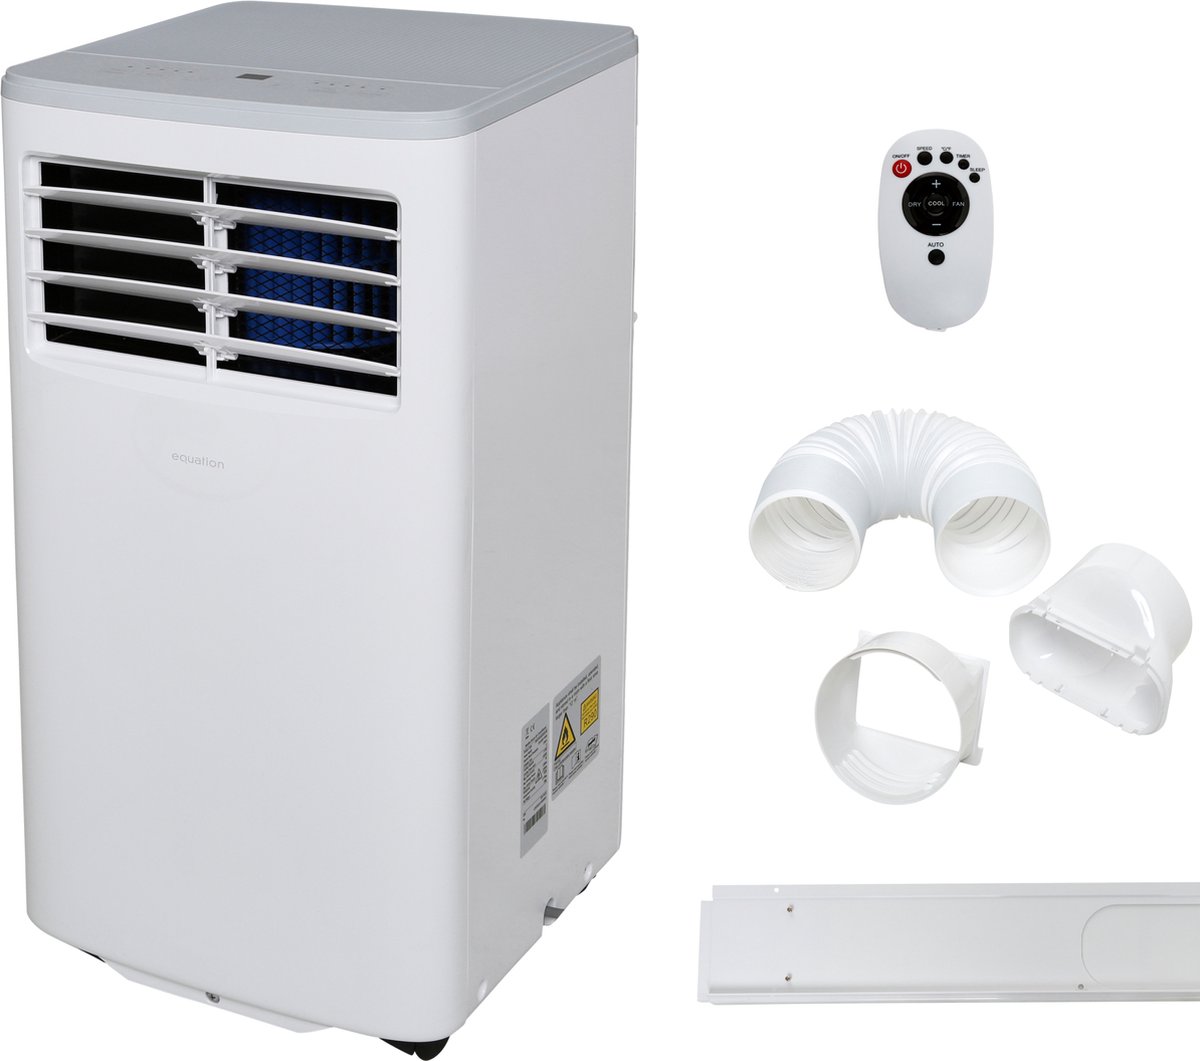 EQUATION- Mobiele airco's - COOL - 320 m³/h - 2100 W - Infrarood afstandsbediening - 3 standen - Airconditioning - Luchtkoeler